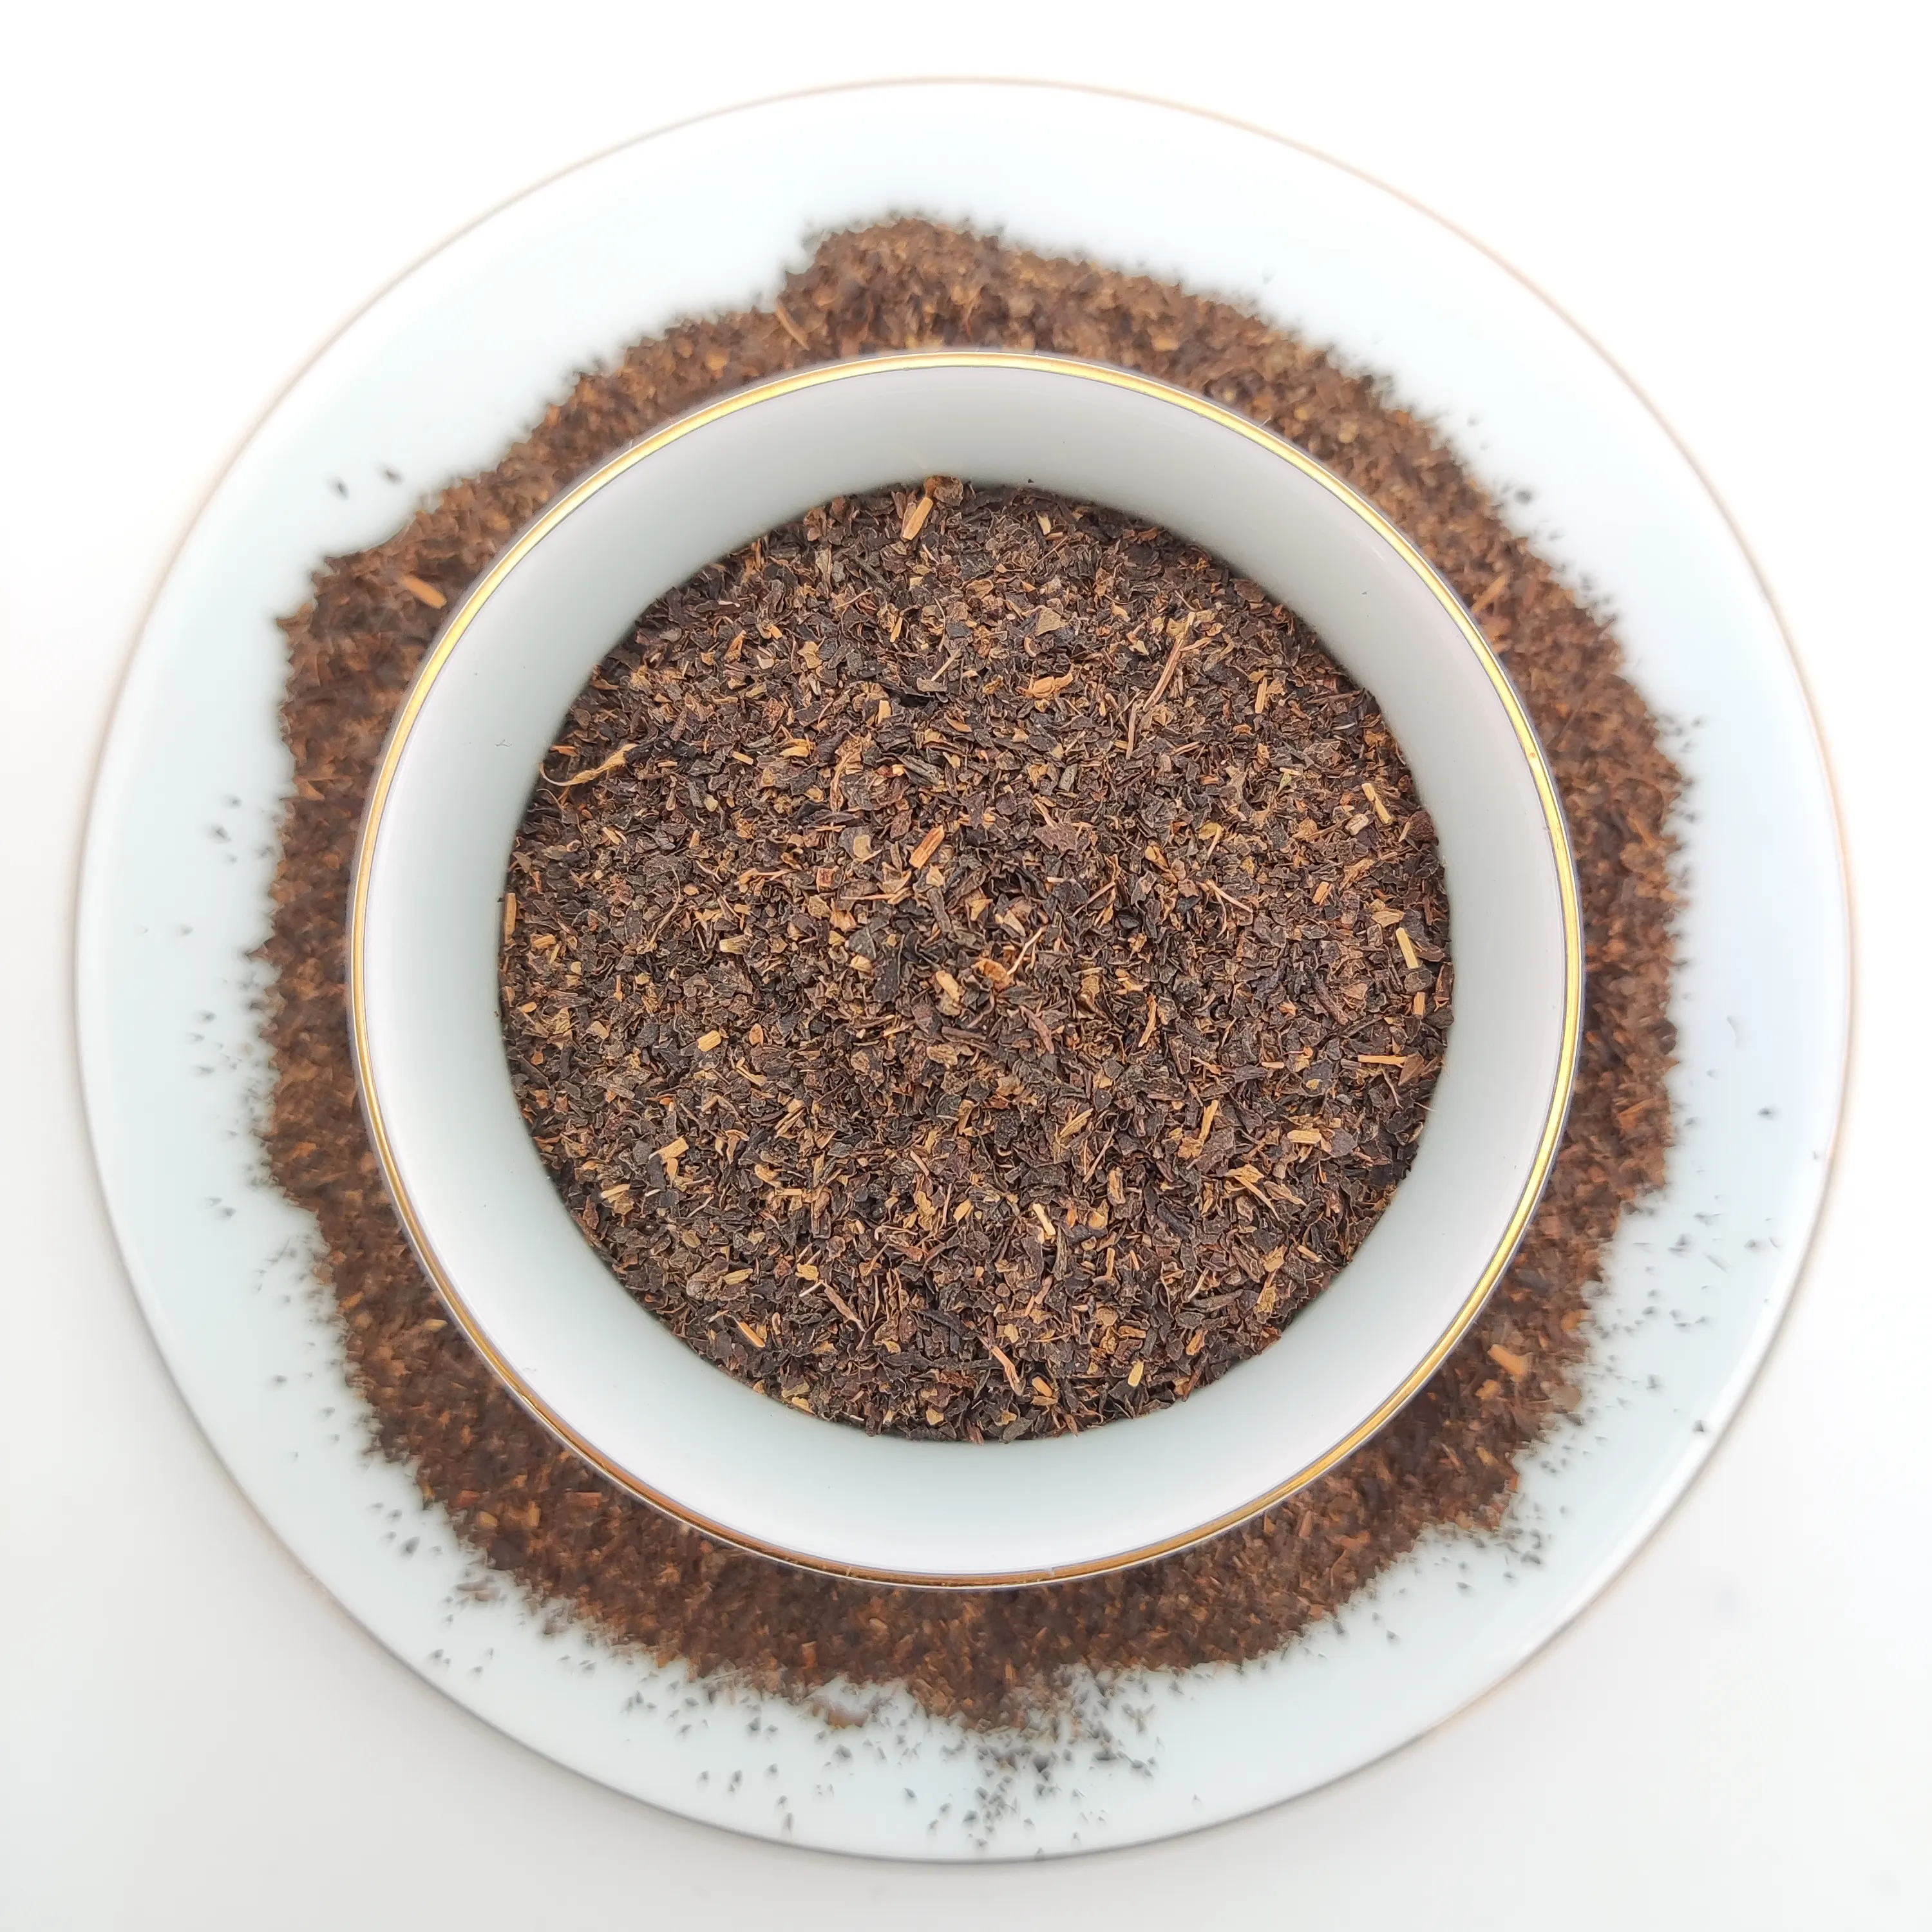 Competitive Price And High Quality Black Tea Organic CTC Black Tea Dust Tea In Daily Use